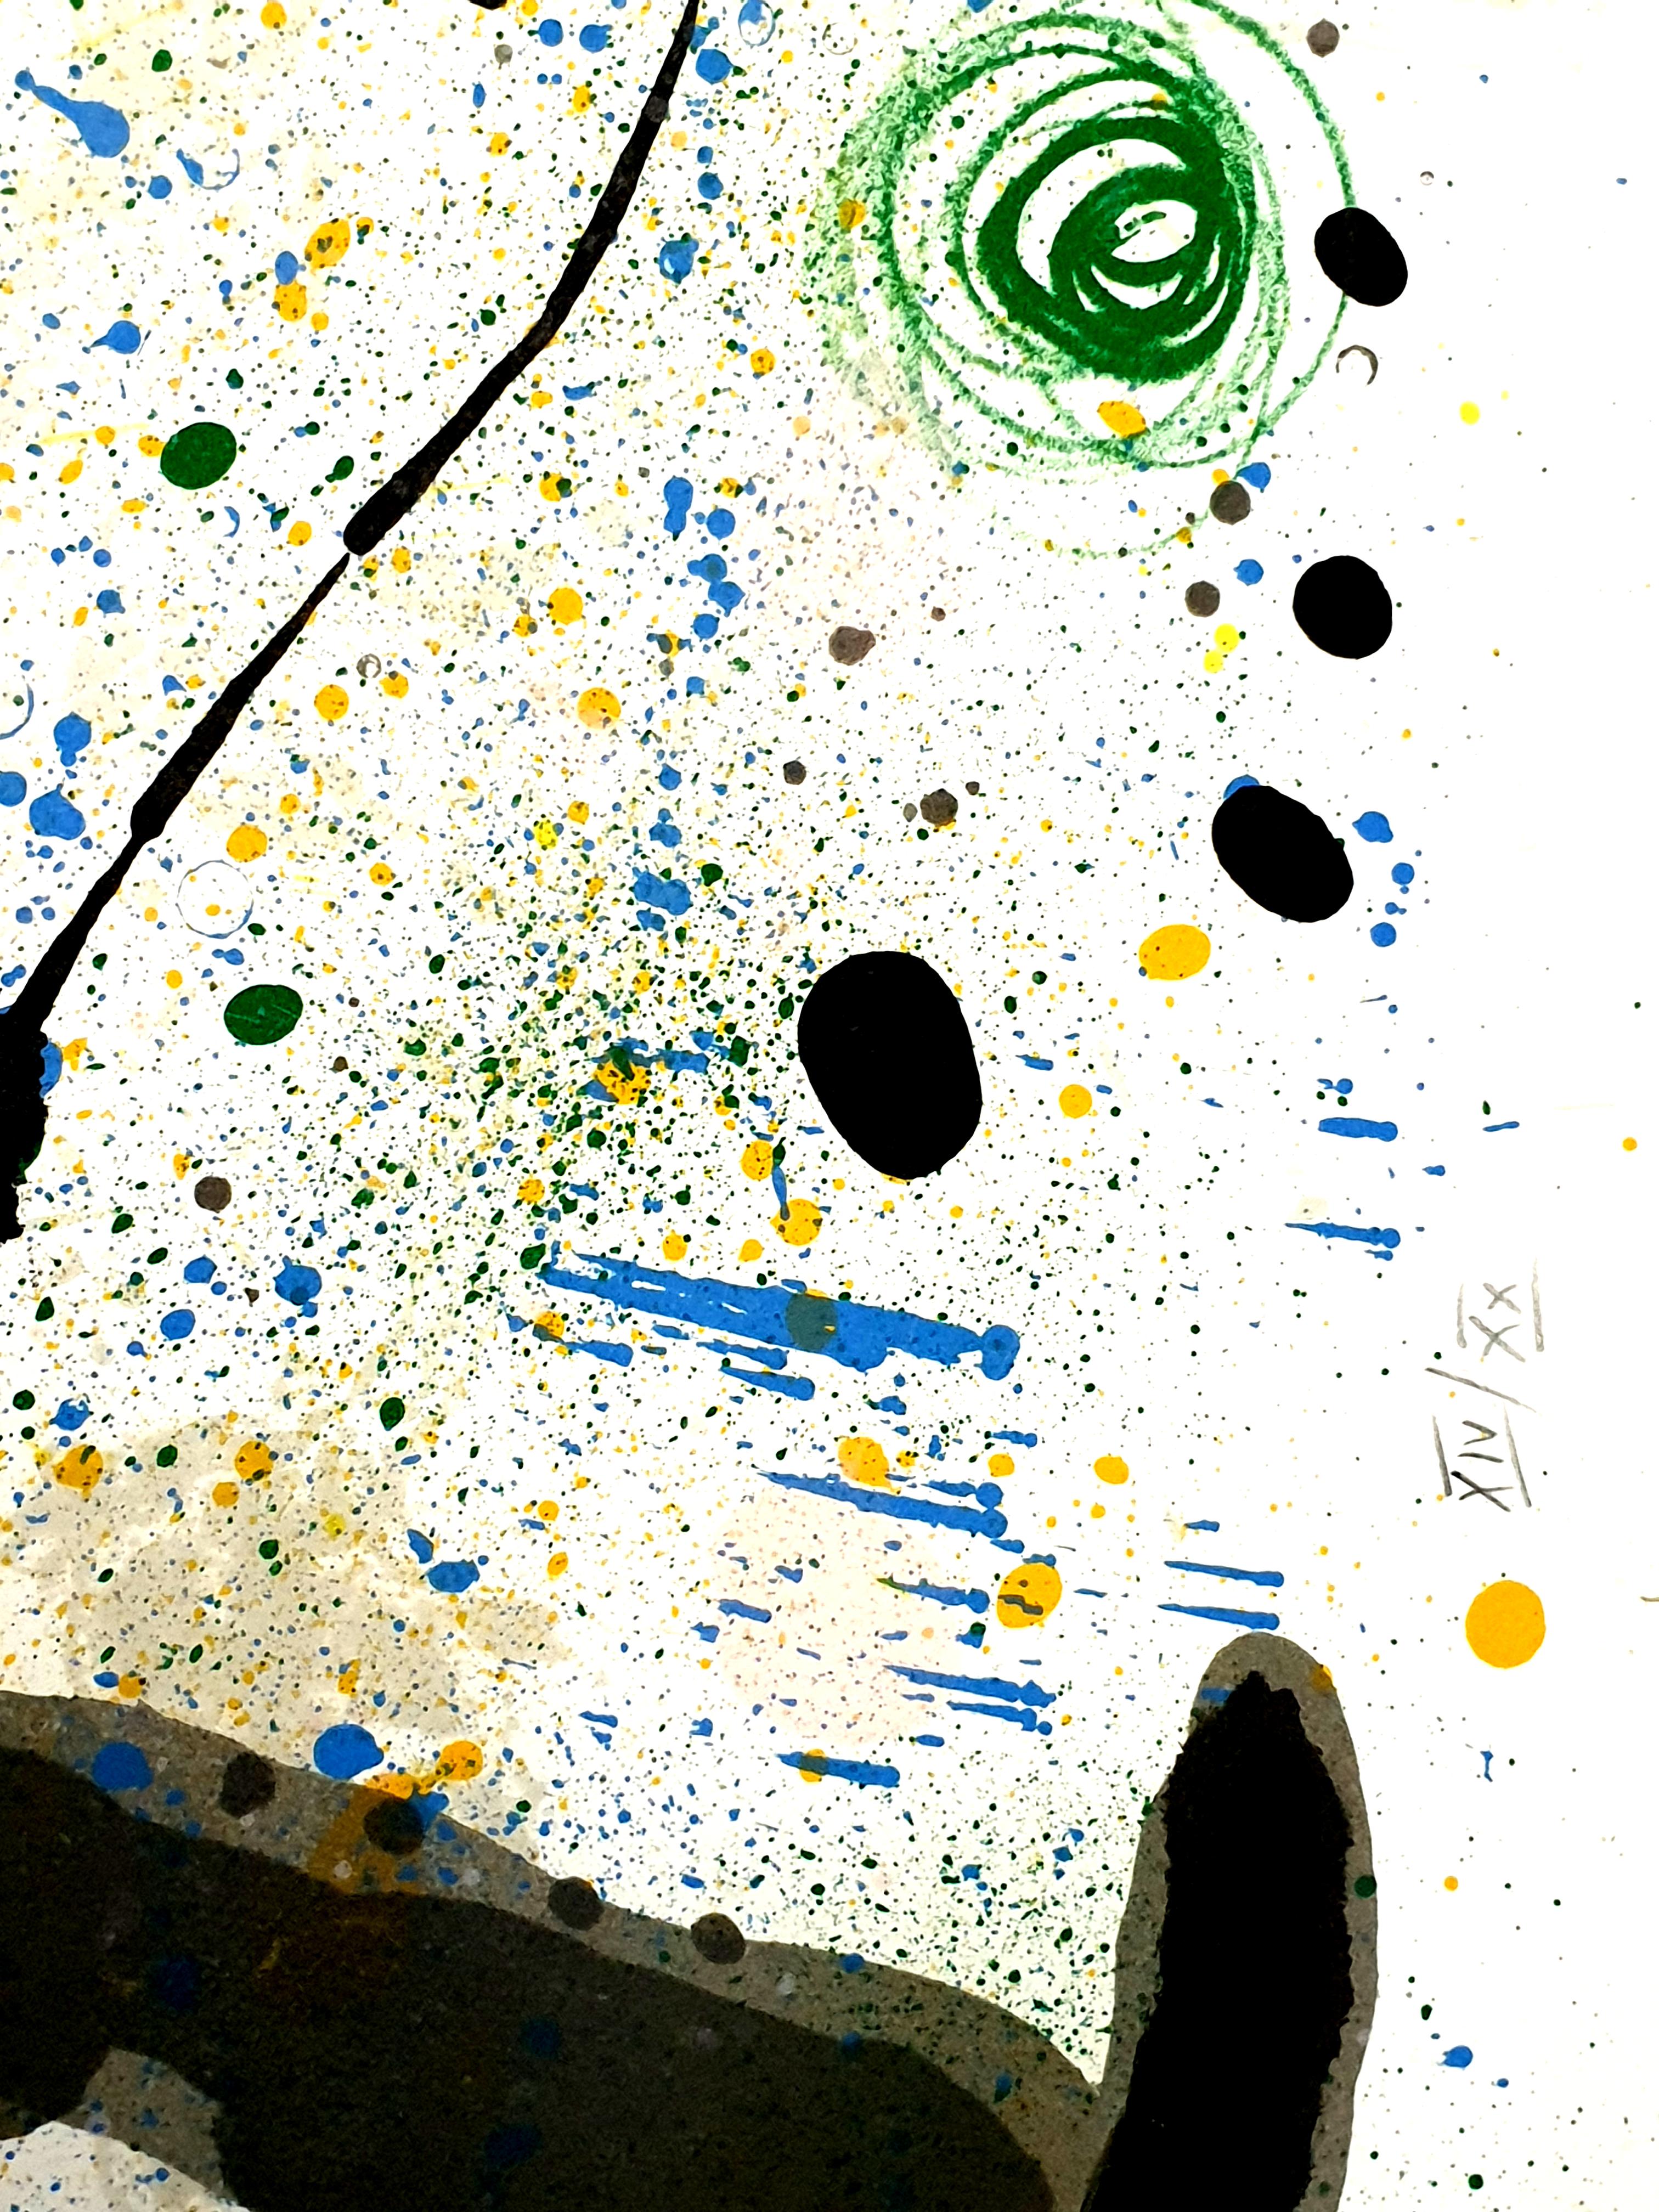 Joan Miro - Plate 8, from Lézard aux plumes d'or - Abstract Print by Joan Miró